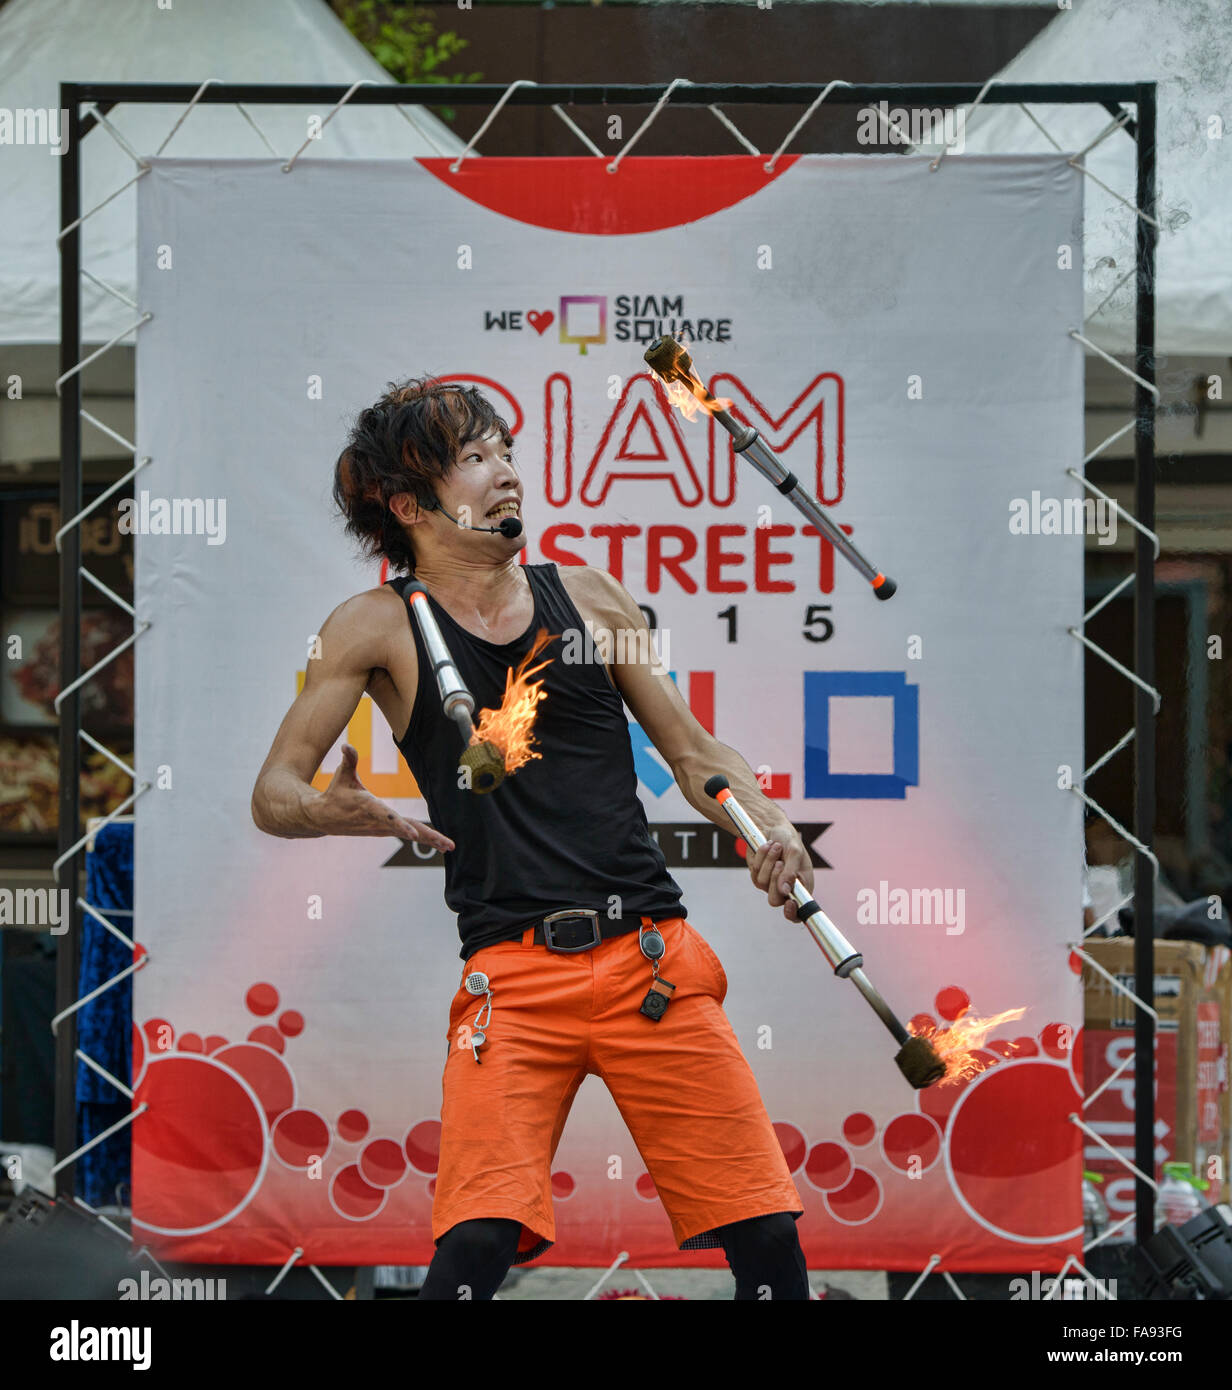 Fire juggling at a street festival in Bangkok, Thailand Stock Photo